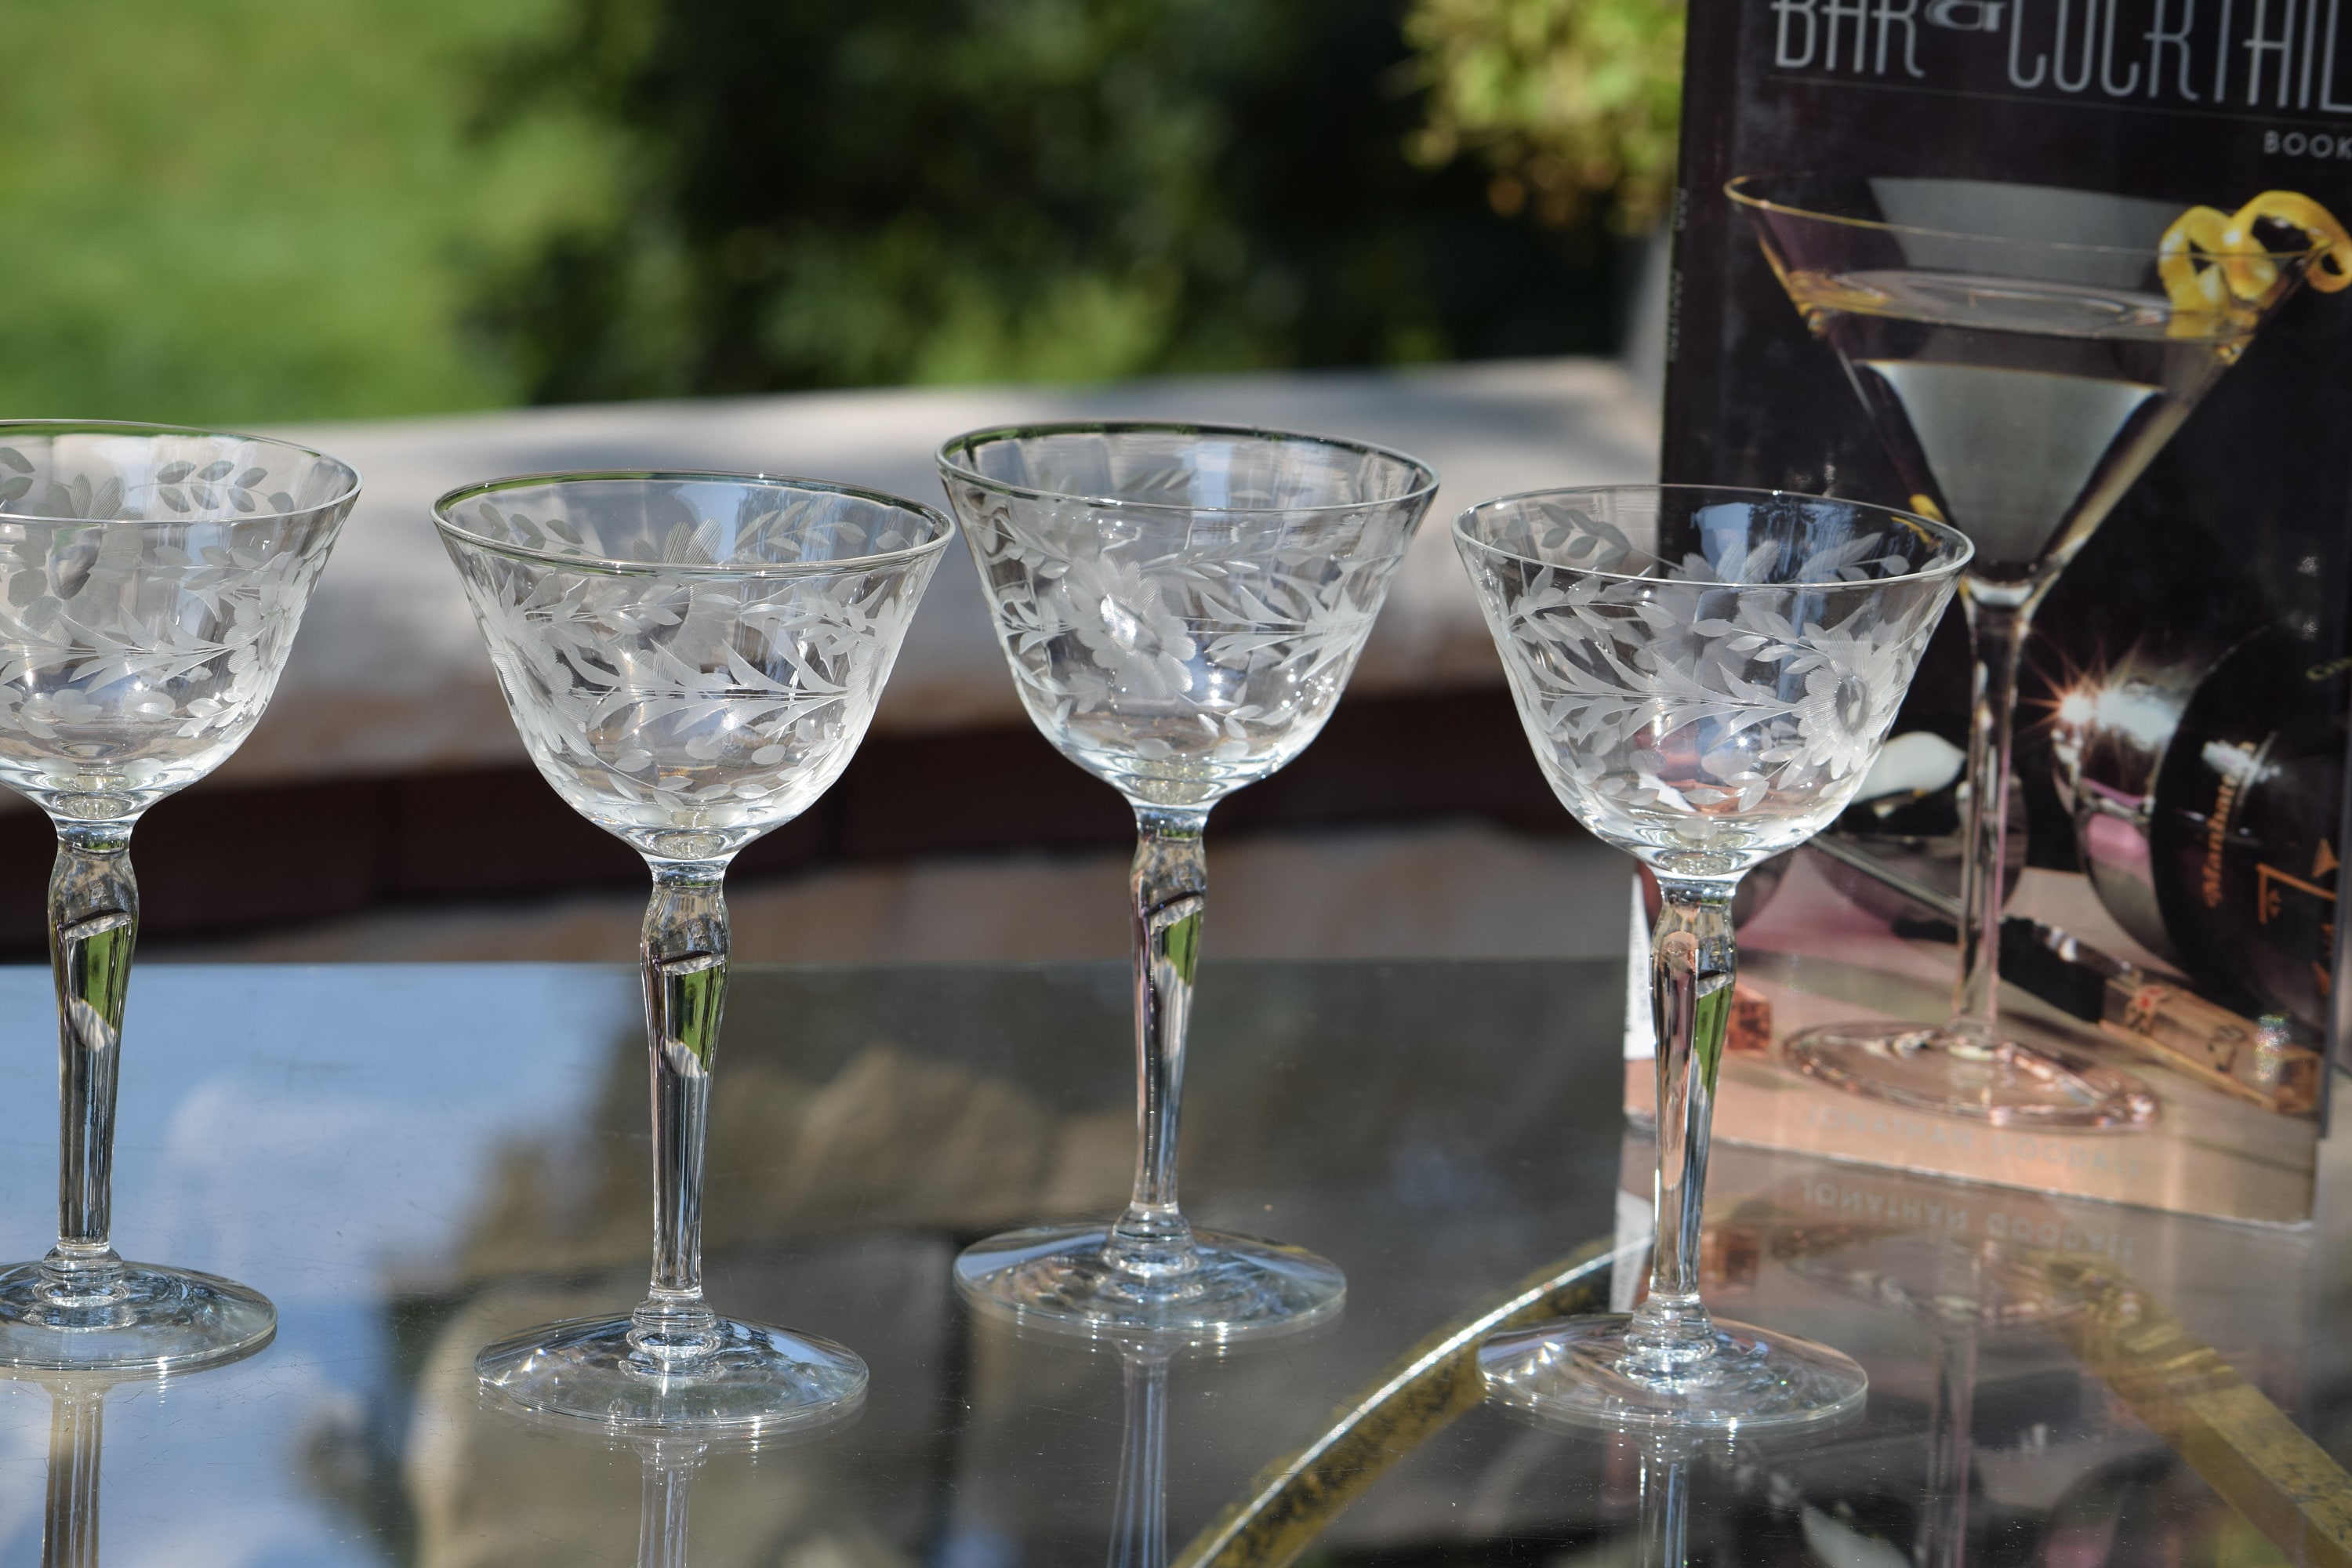 5 Vintage Etched Cocktail ~ Martini Glasses, Tiffin Franciscan, 1950's,  Nick and Nora, Mixologist Craft Cocktails ~ Champagne Glass